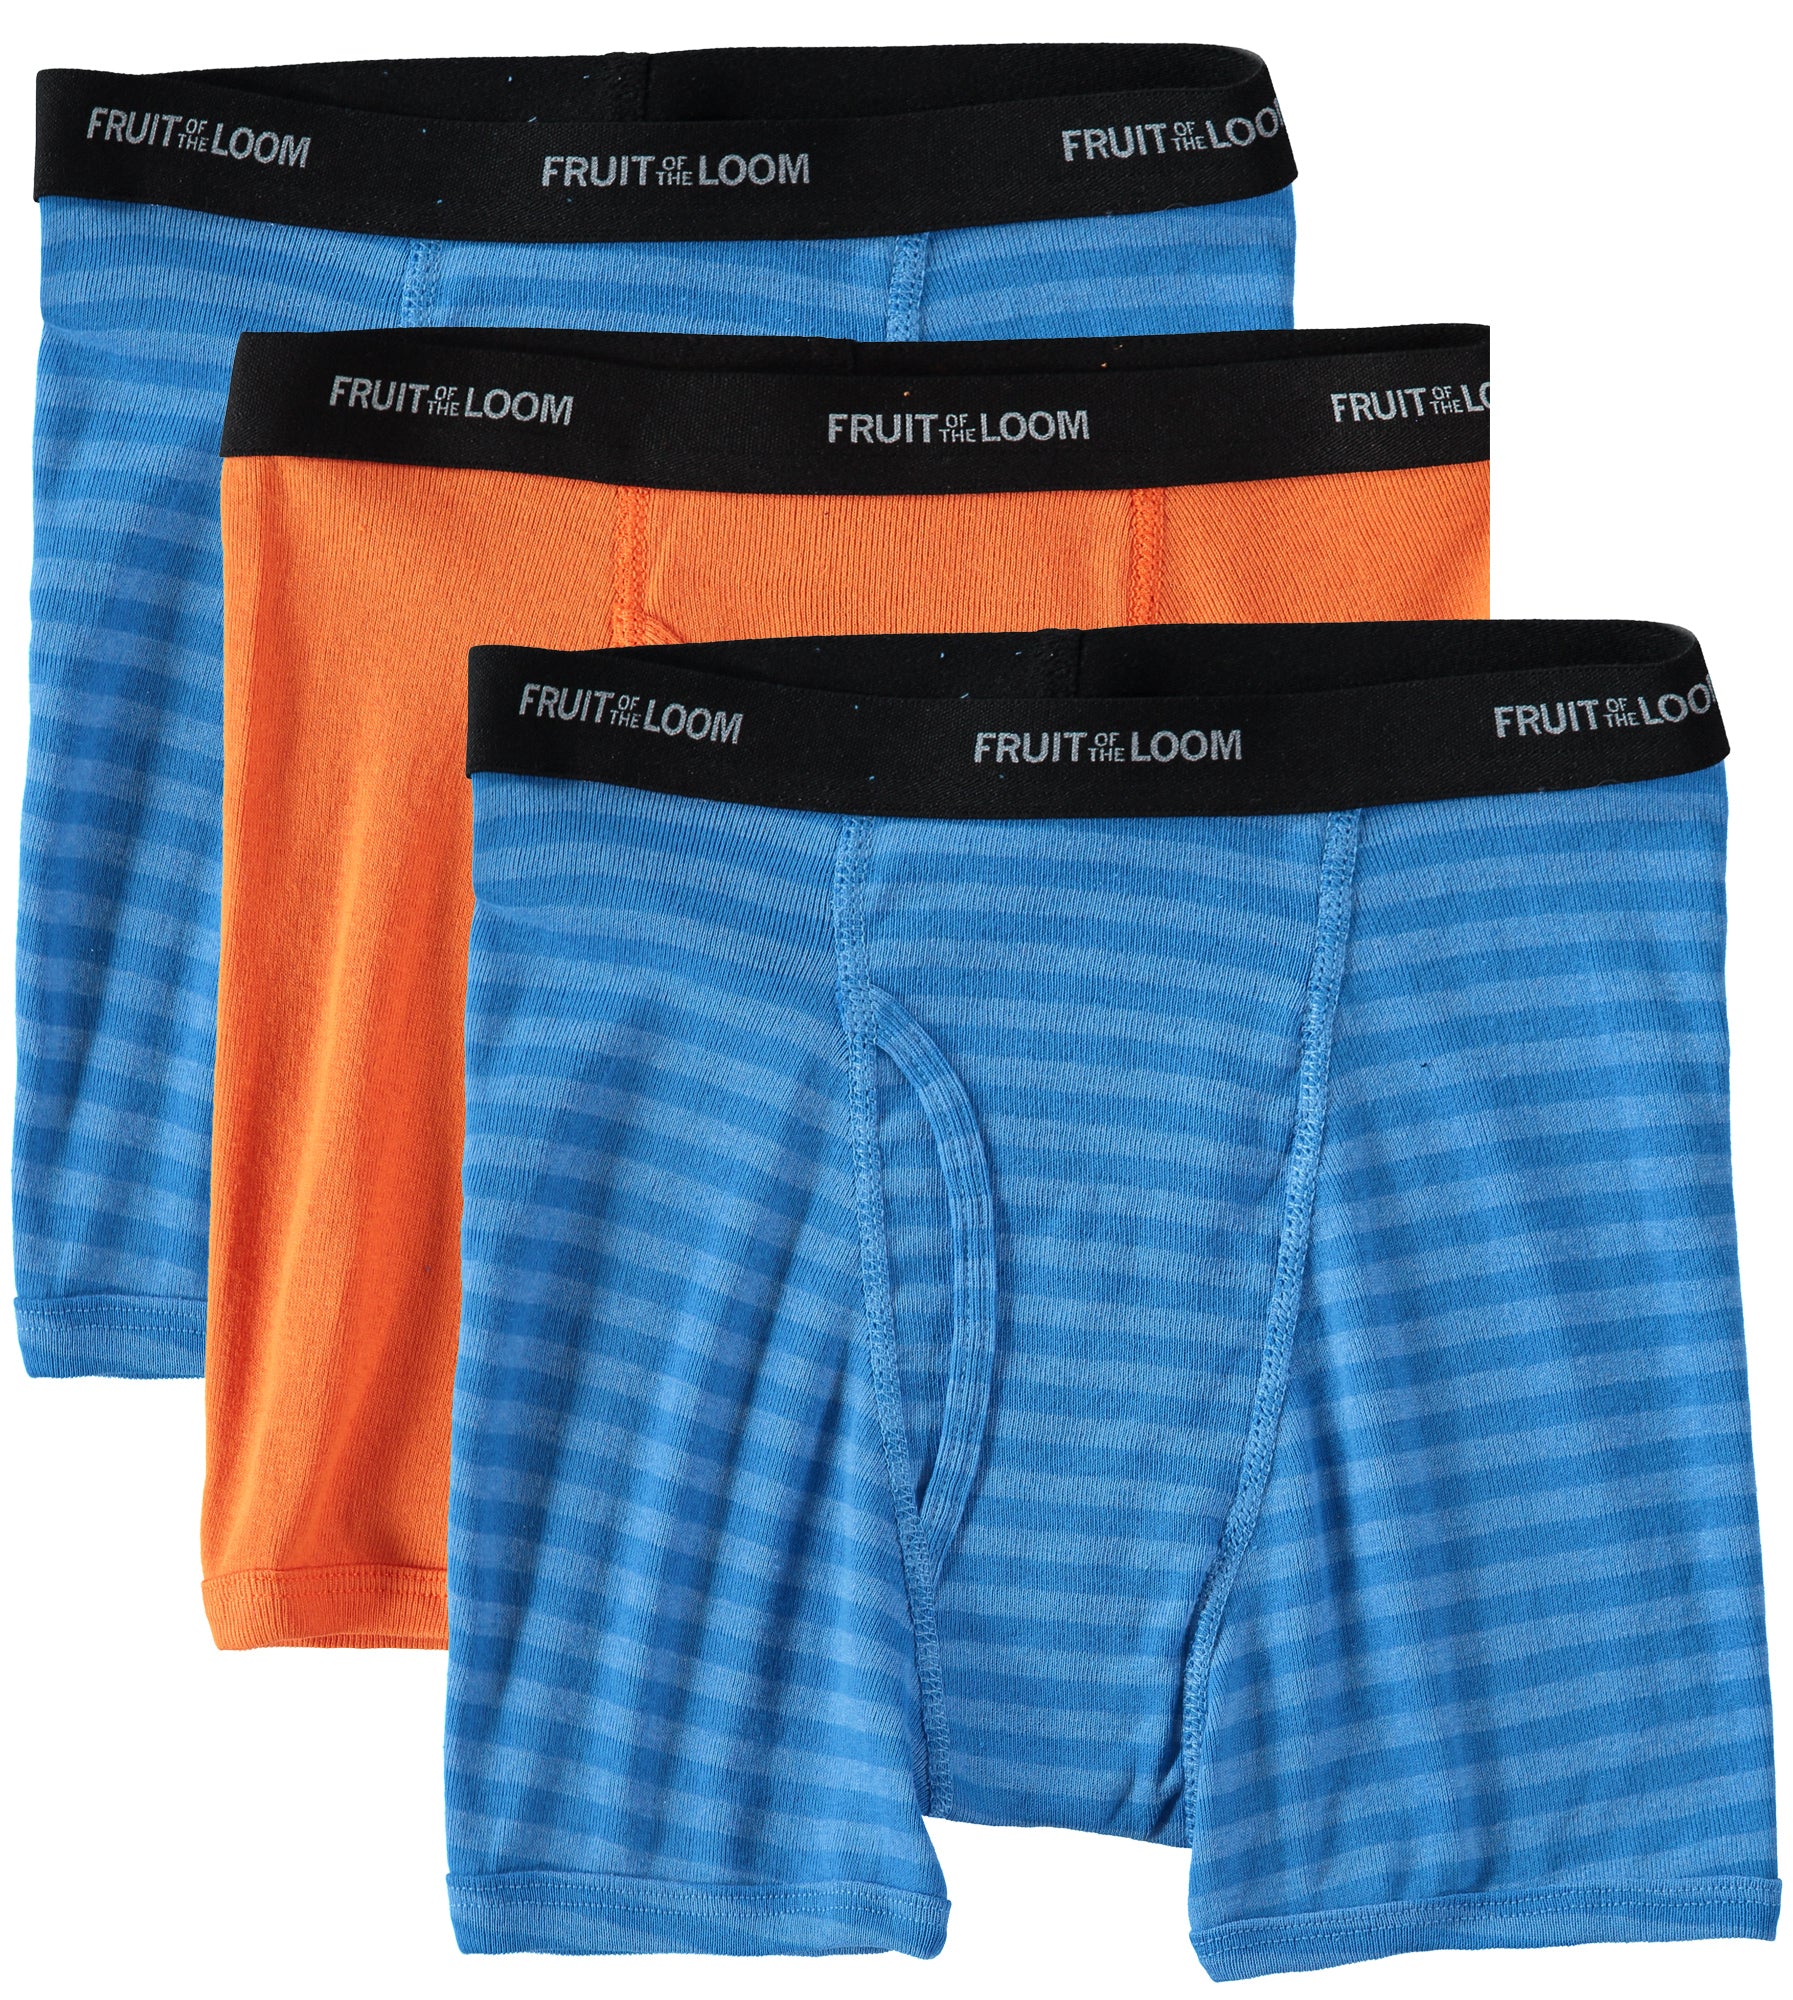 Fruit of the Loom Boys' Breathable Cotton Mesh Boxer Brief, 4-Pack